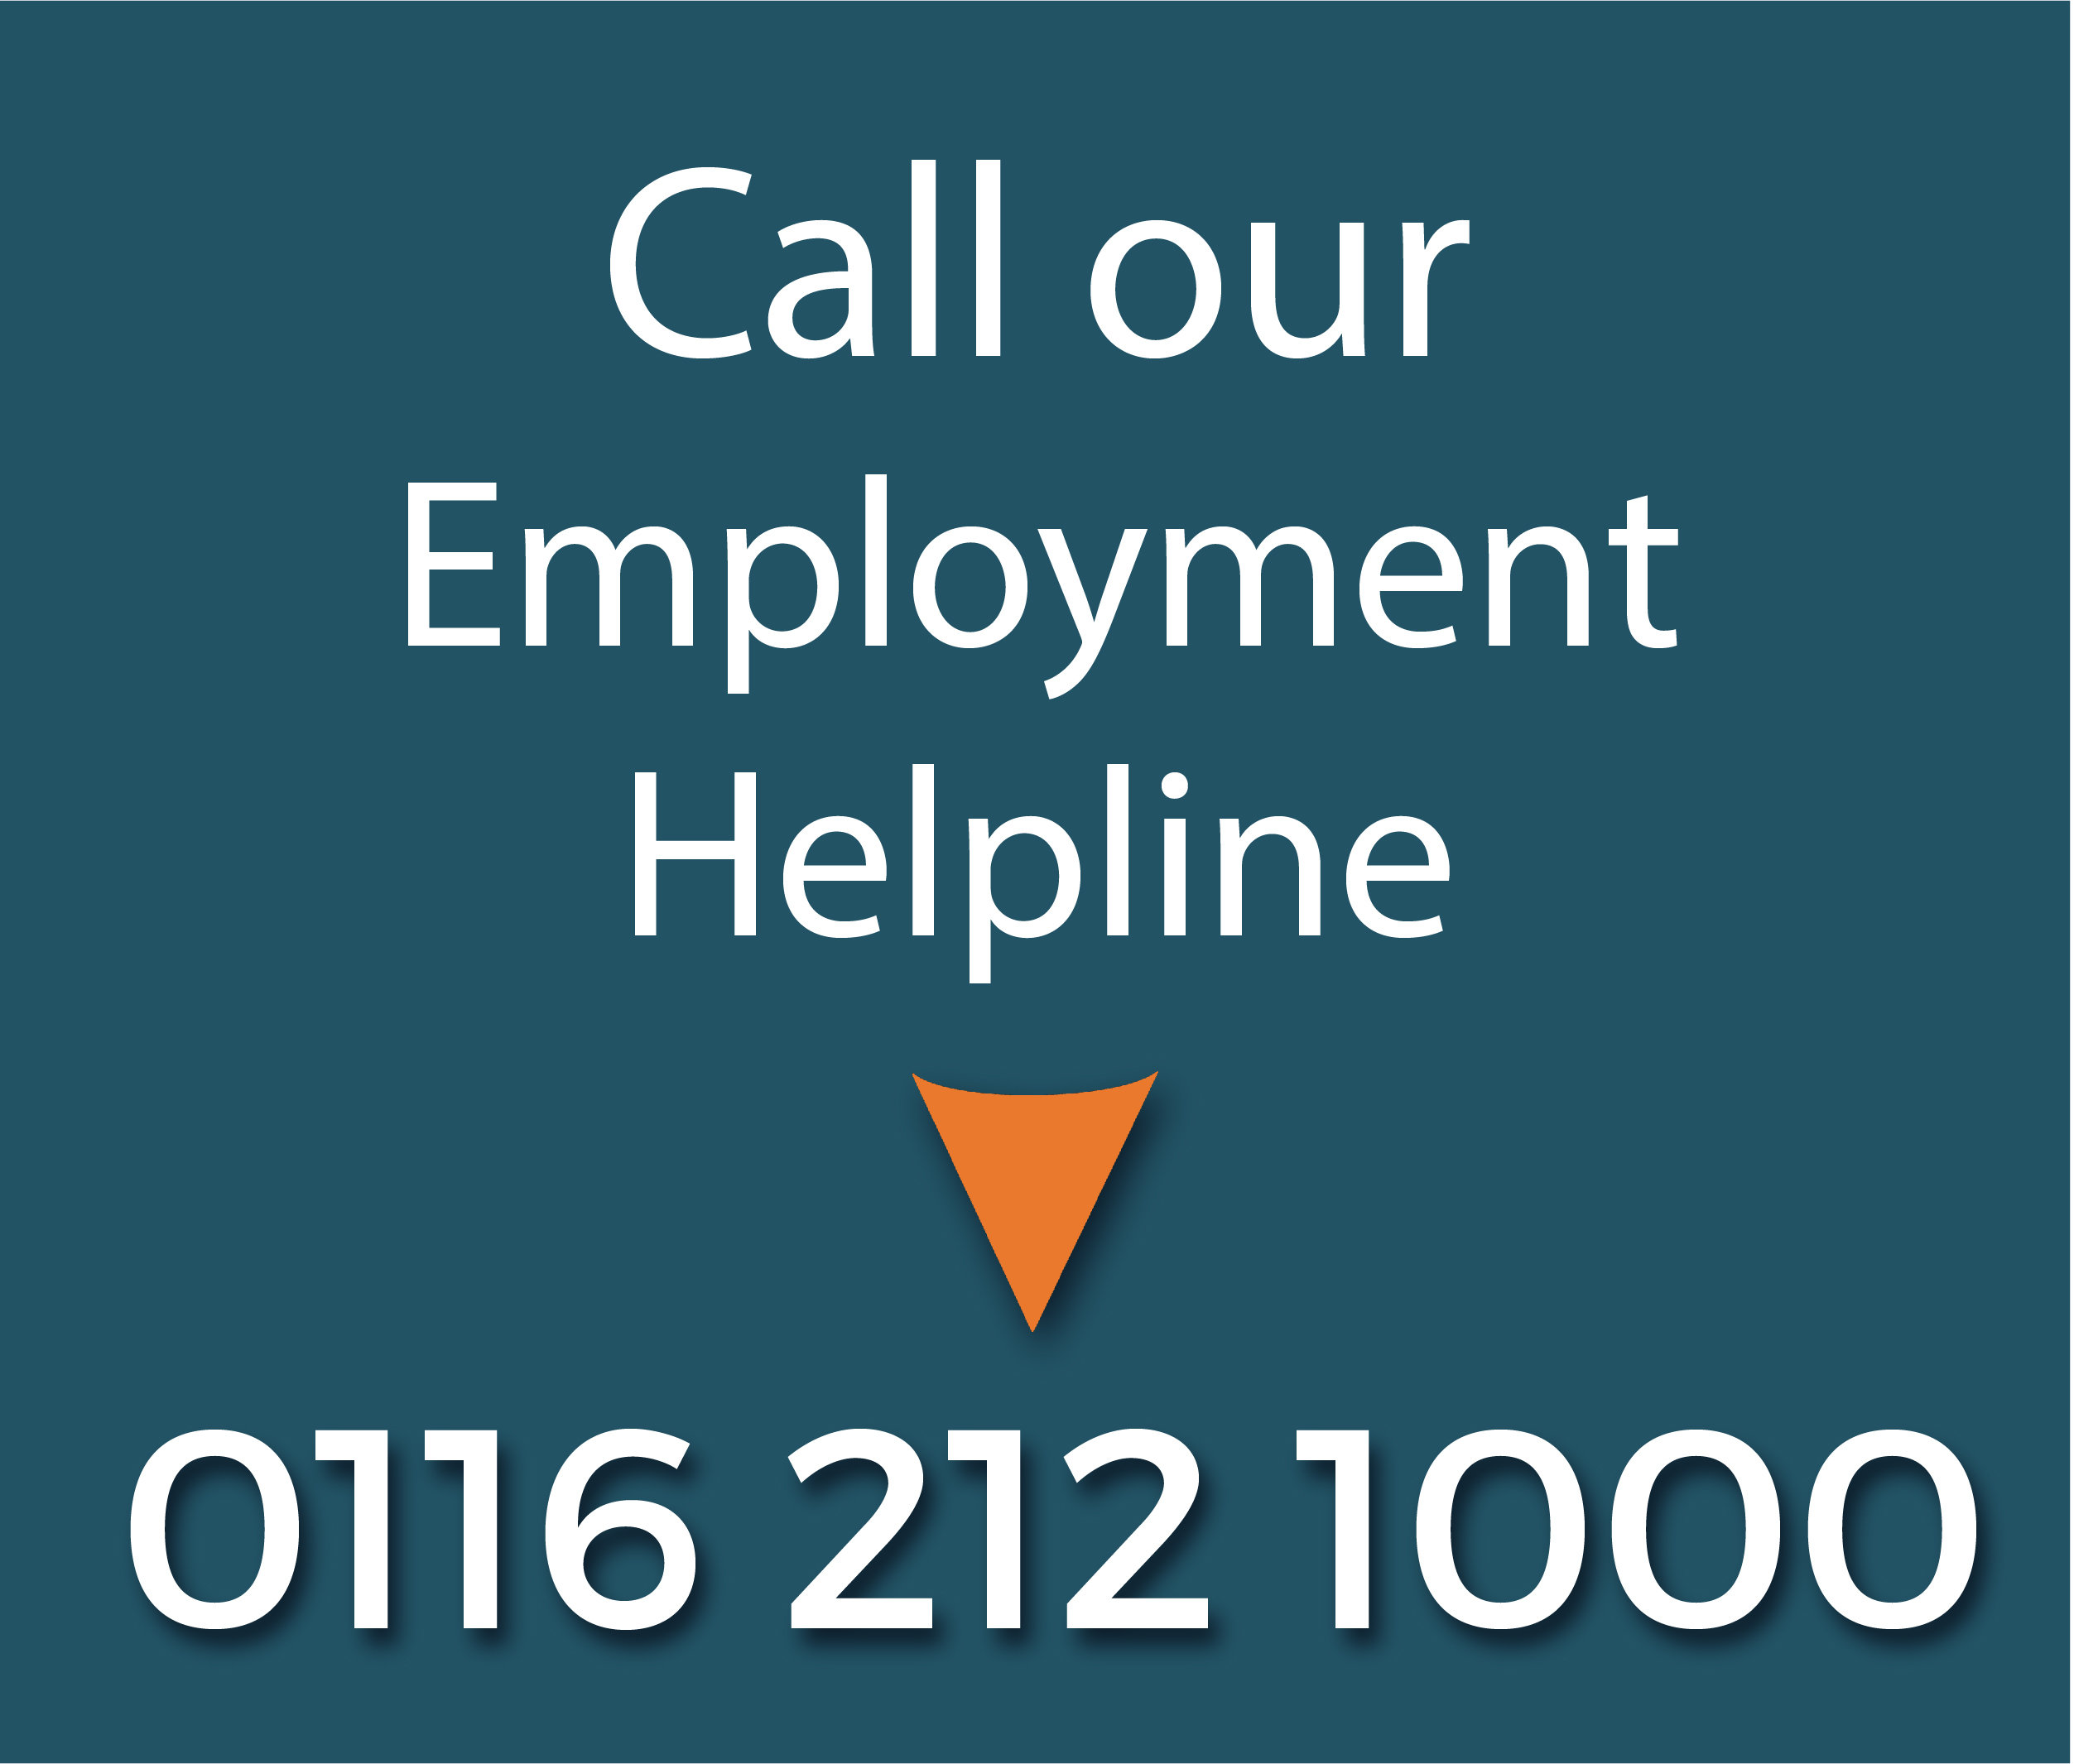 employment law helpline to help with claims against your employer in UK with qualified solicitors and advice